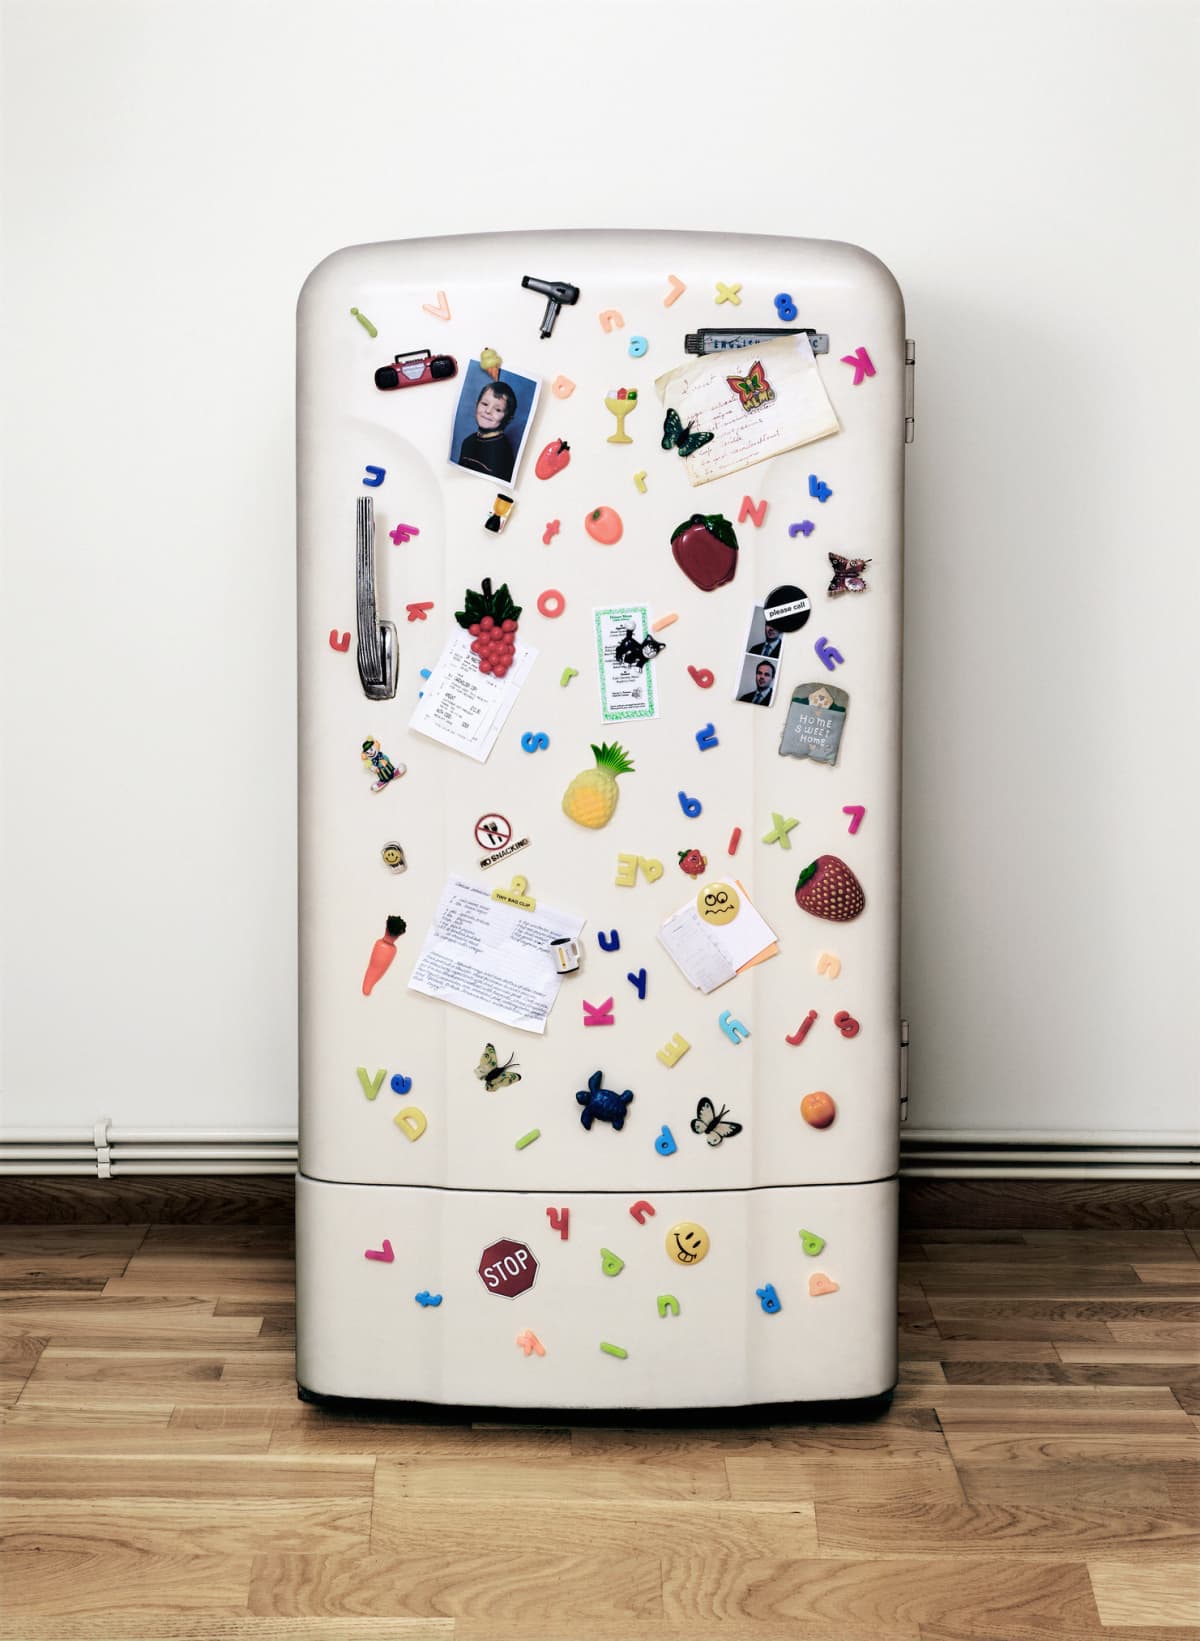 A fridge covered in magnets, notes, and photographs